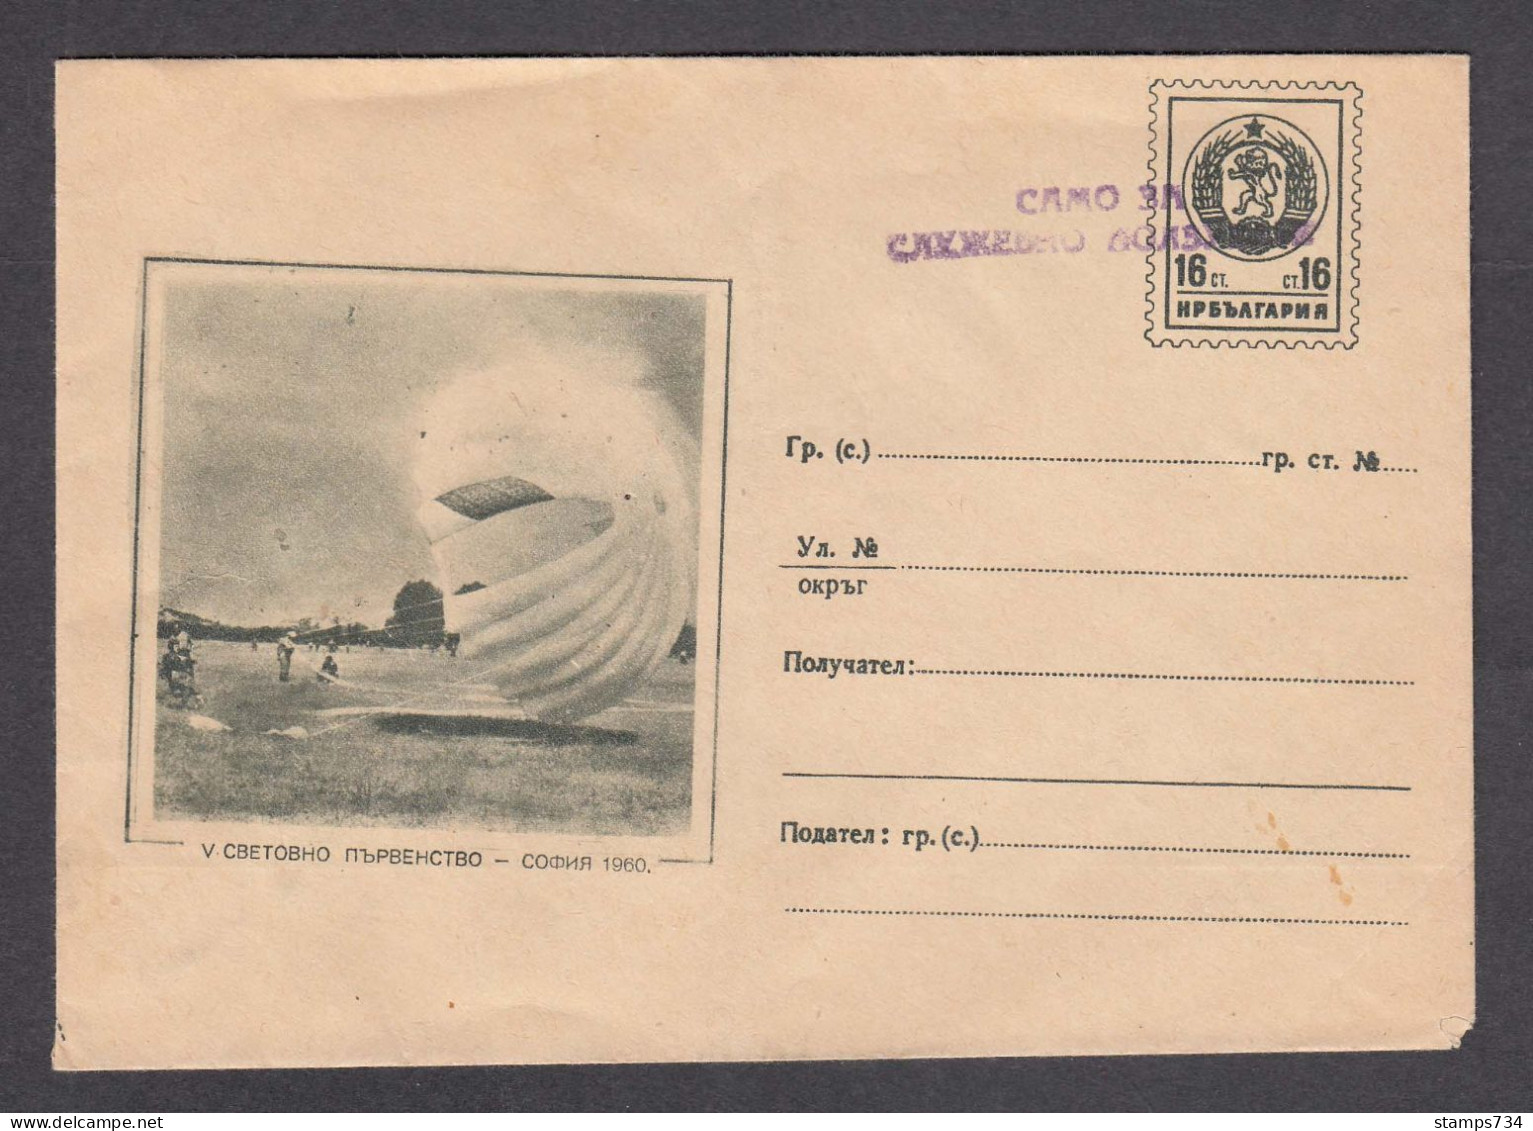 PS 212/1960 - Mint, 5. World Parachuting Championship, Sofia, FOR OFFICIAL USE ONLY, Post. Stationery - Bulgaria - Enveloppes